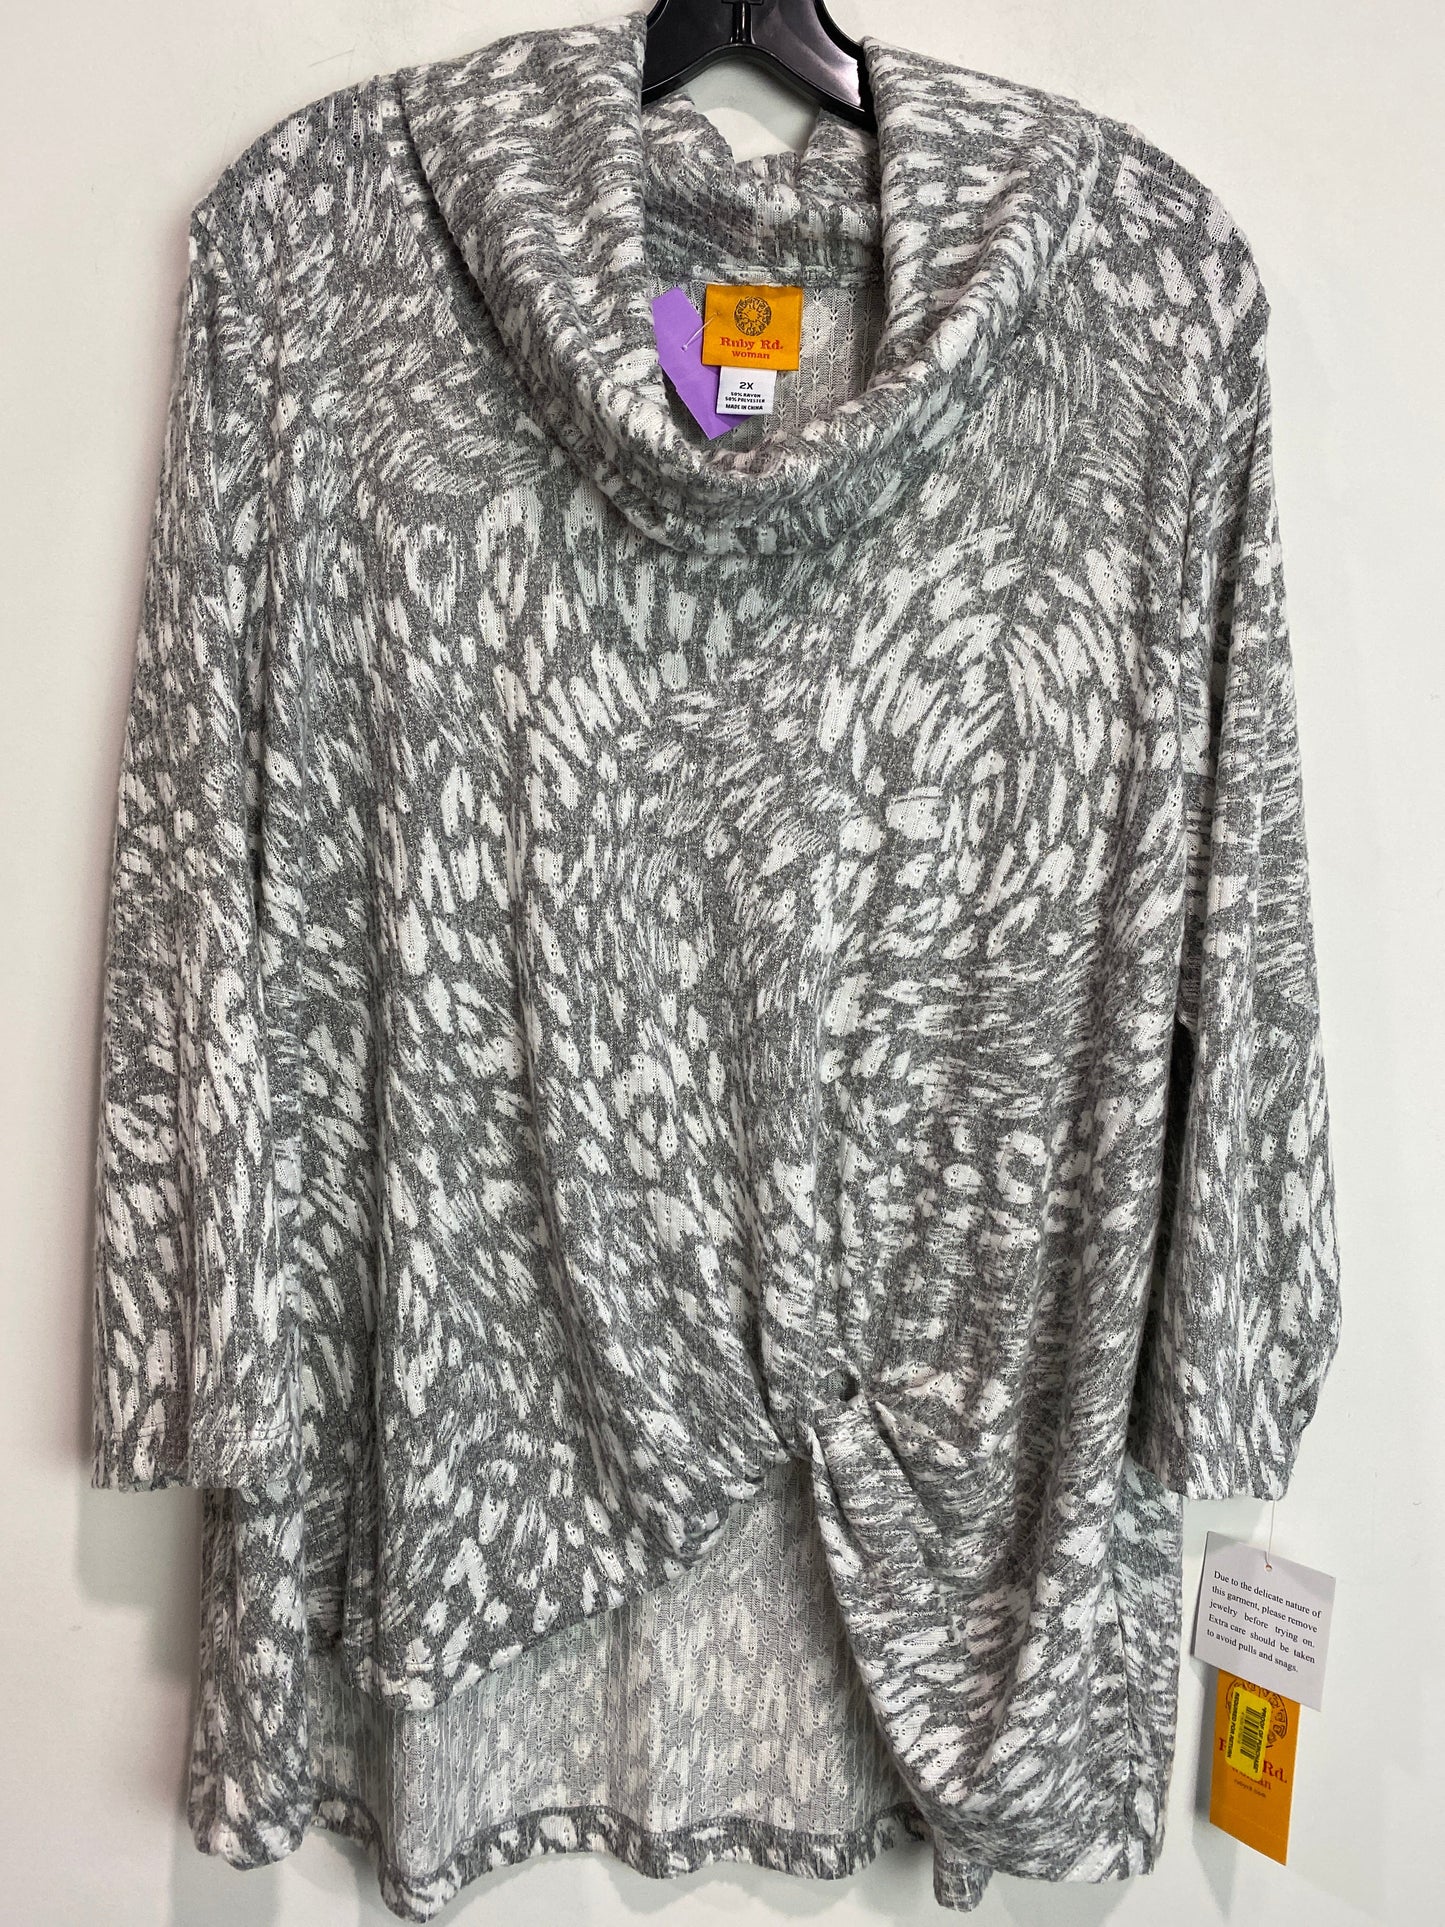 Grey Top Long Sleeve Ruby Rd, Size 2x